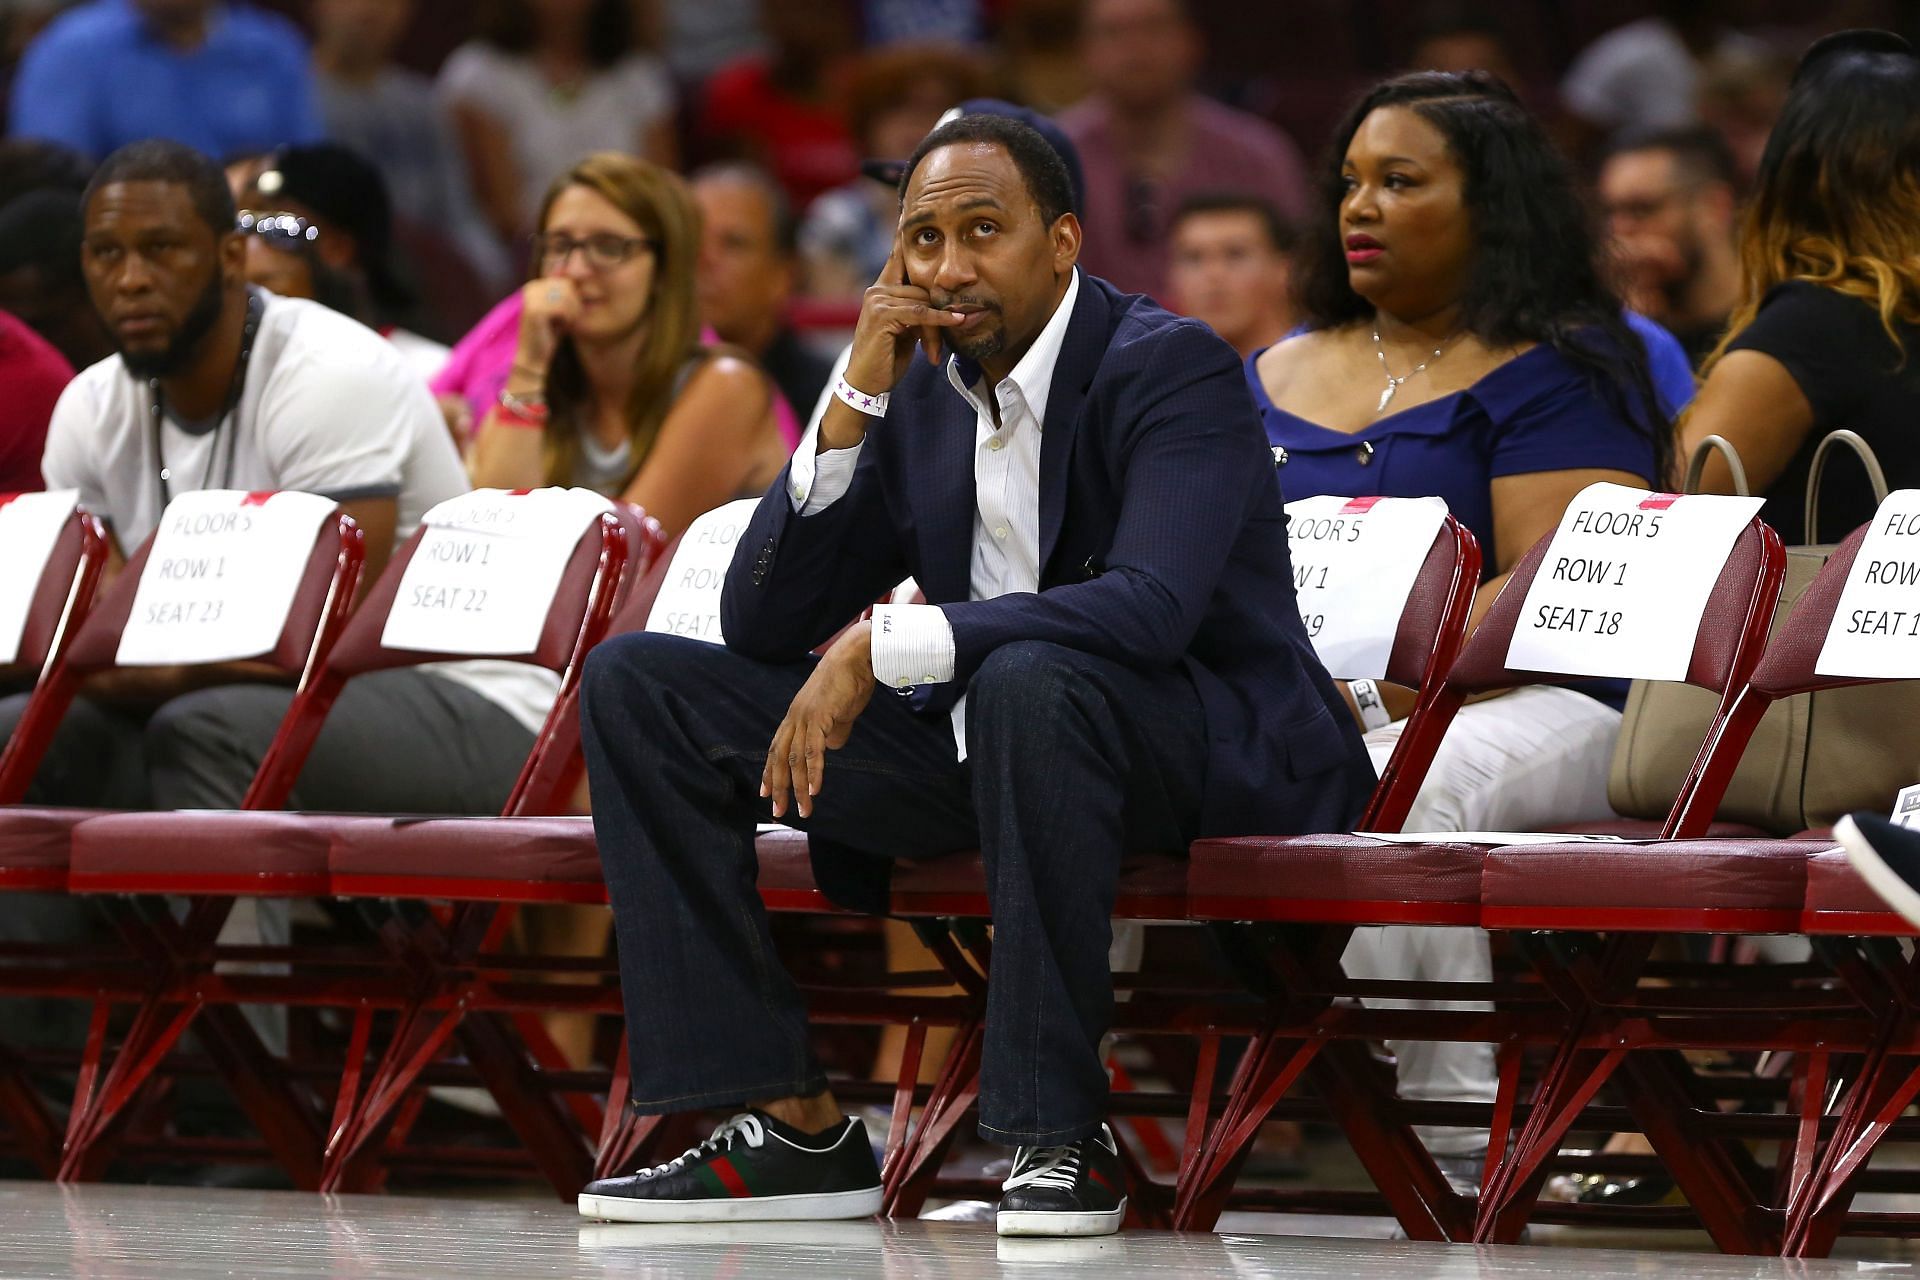 Stephen A. Smith in attendance at a BIG3 game